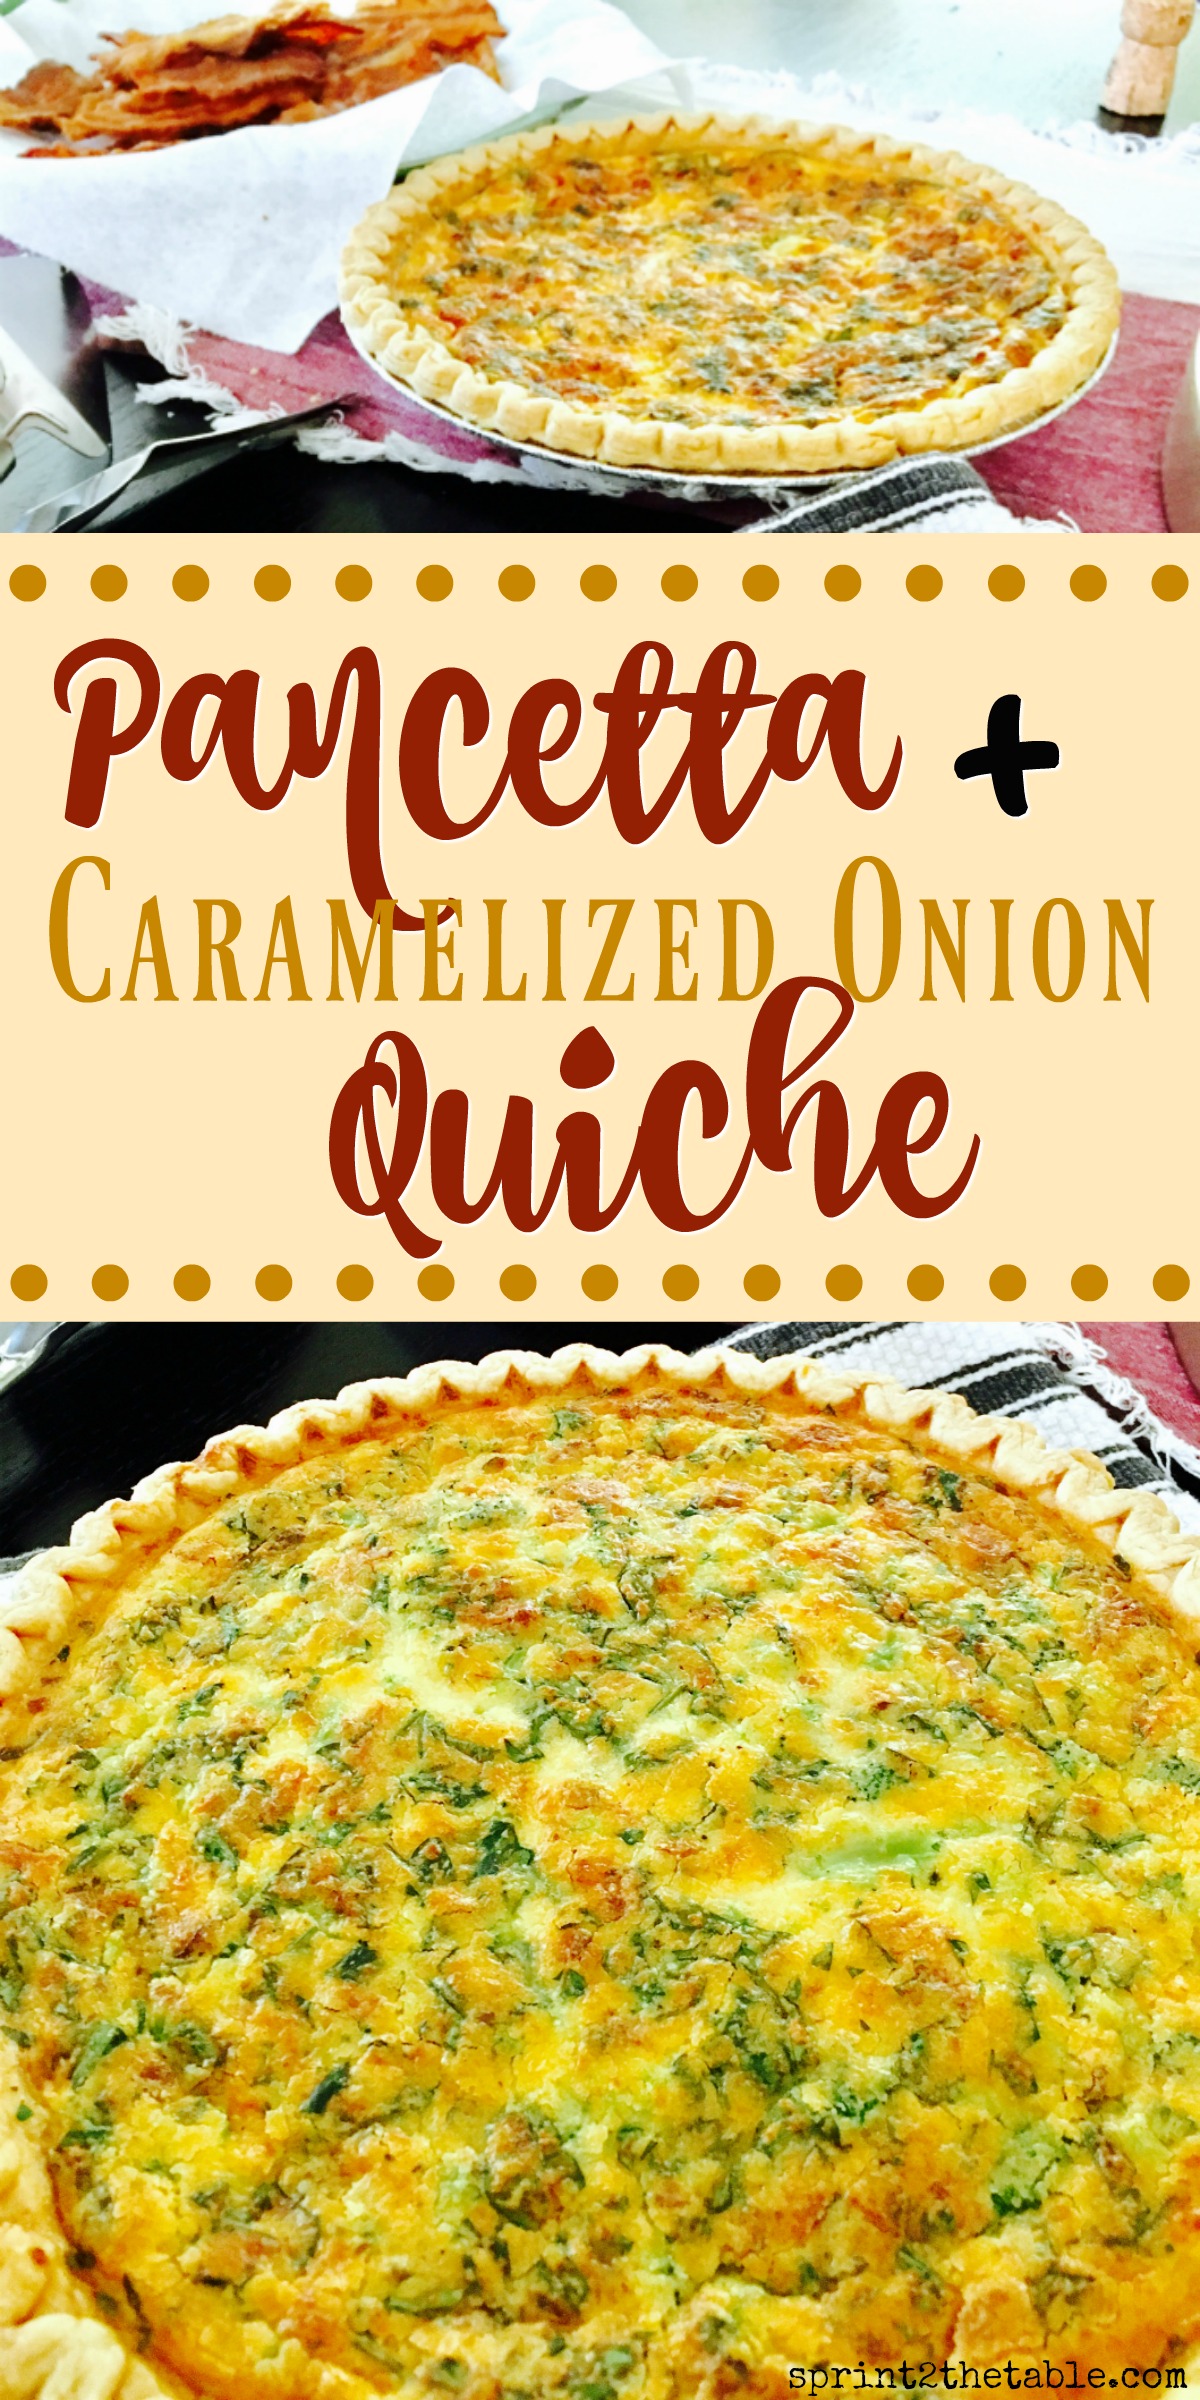 This cheesy Pancetta and Caramelized Onion Quiche is perfect for brunch or brinner. You'll be amazed at how quickly it comes together!